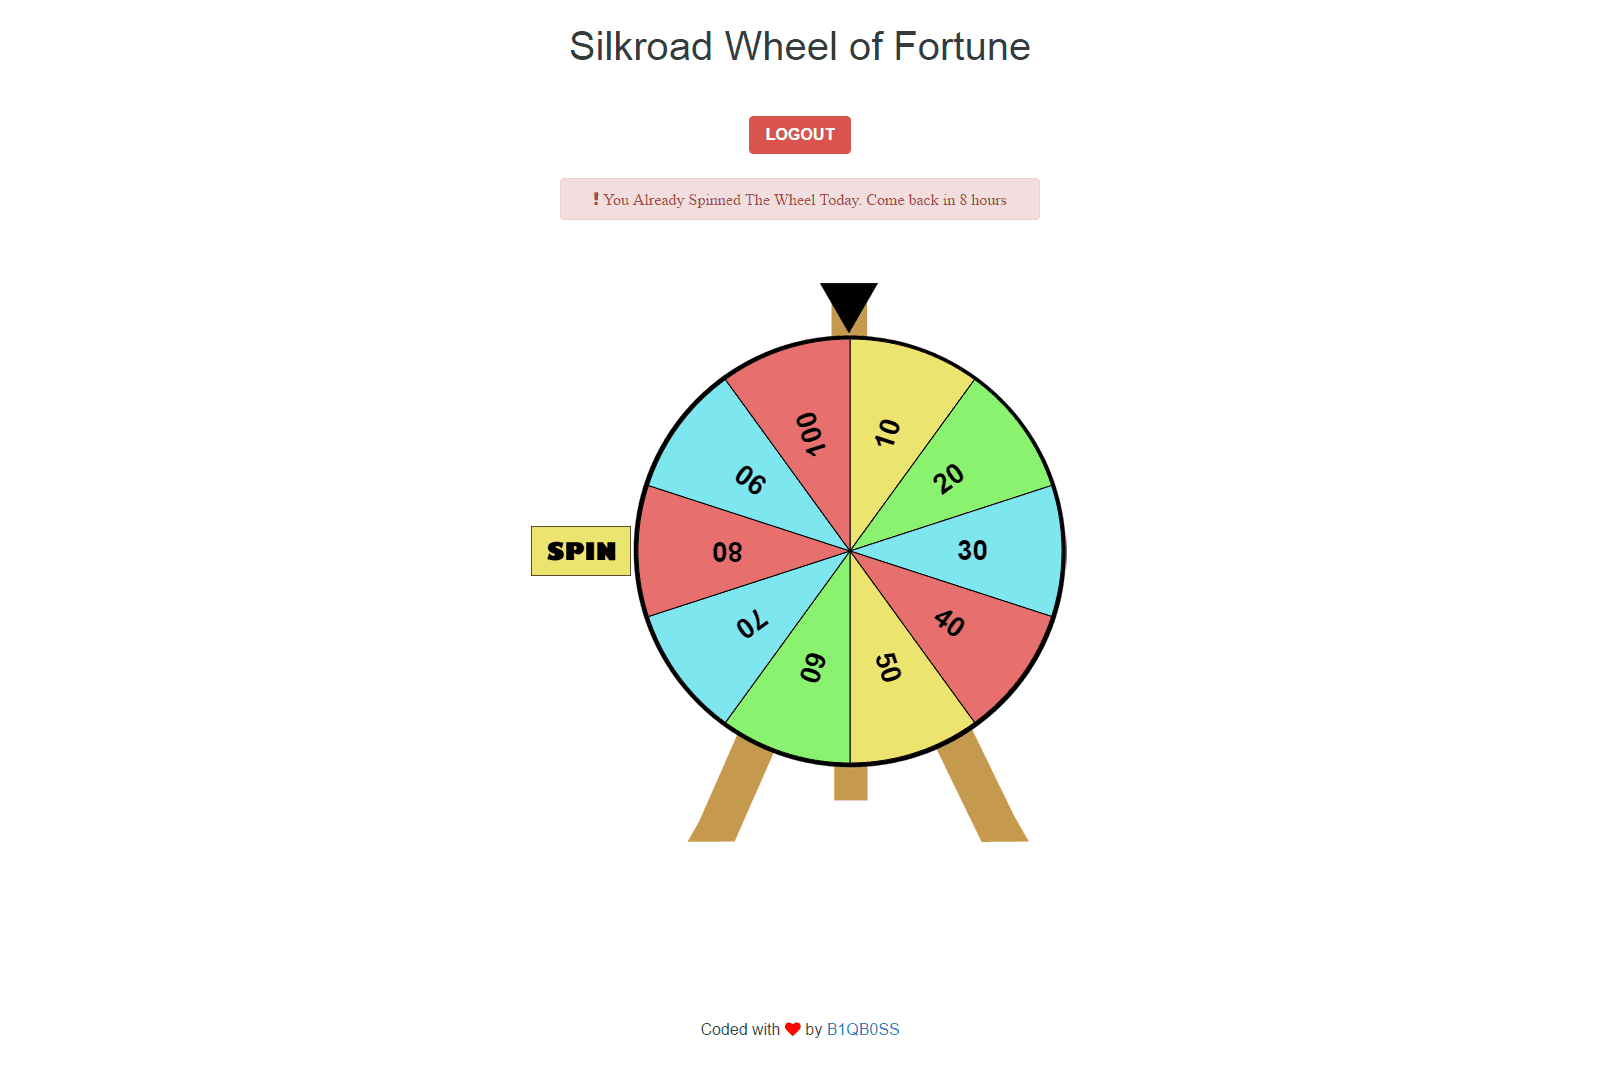 m7udHmy - [Release][PHP] Silkroad wheel of fortune? - RaGEZONE Forums